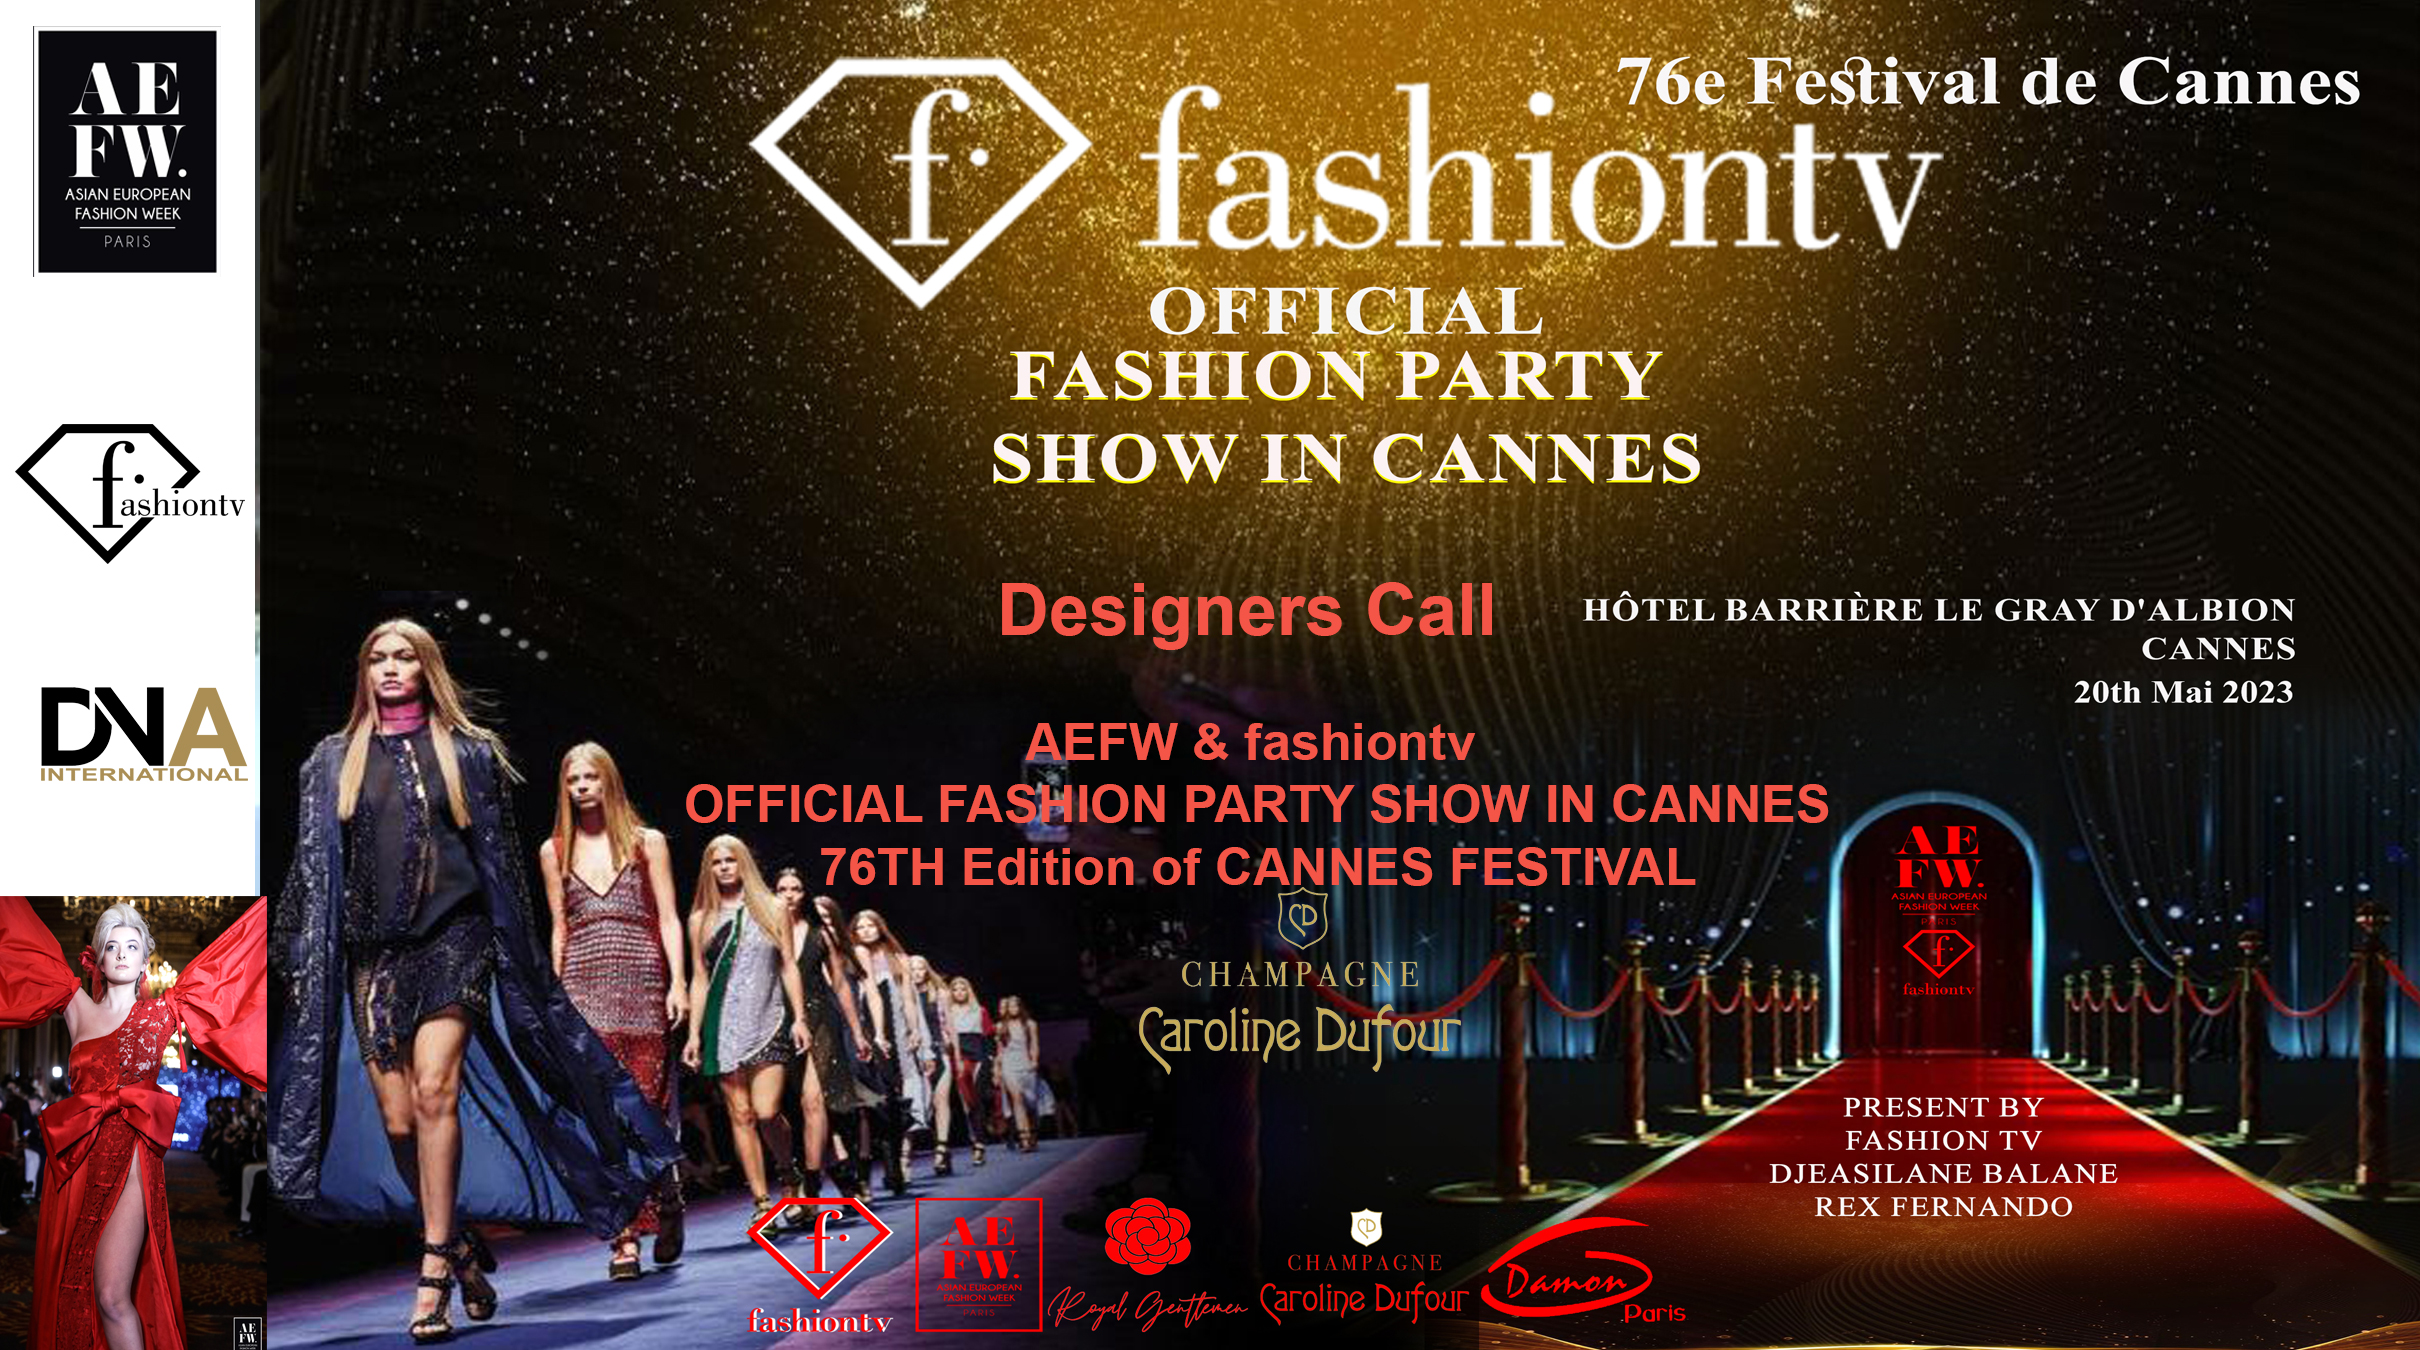 AFRICA-VOGUE-COVER-Designers-Call-AEFW-presents-fashiontv-OFFICIAL-FASHION-PARTY-SHOW-IN-CANNES-76TH-Edition-of-CANNES-FESTIVAL-DN-AFRICA-DN-A-INTERNATIONAL-Media-Partenaire